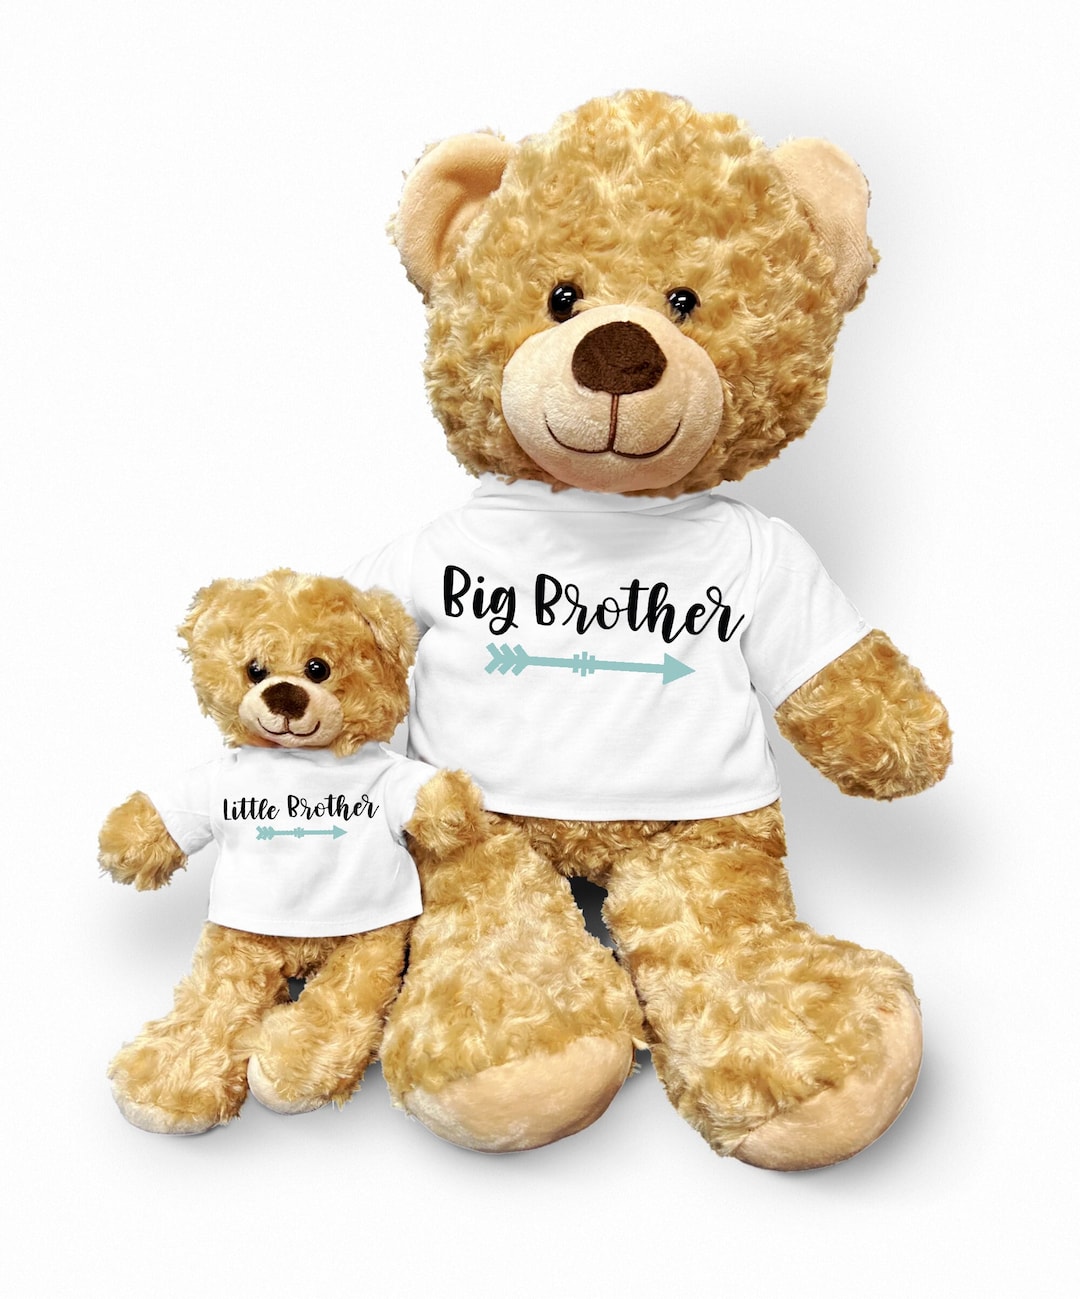 Big And Little Brother Teddy Bears Set New Big Brother Plush Etsy New Zealand